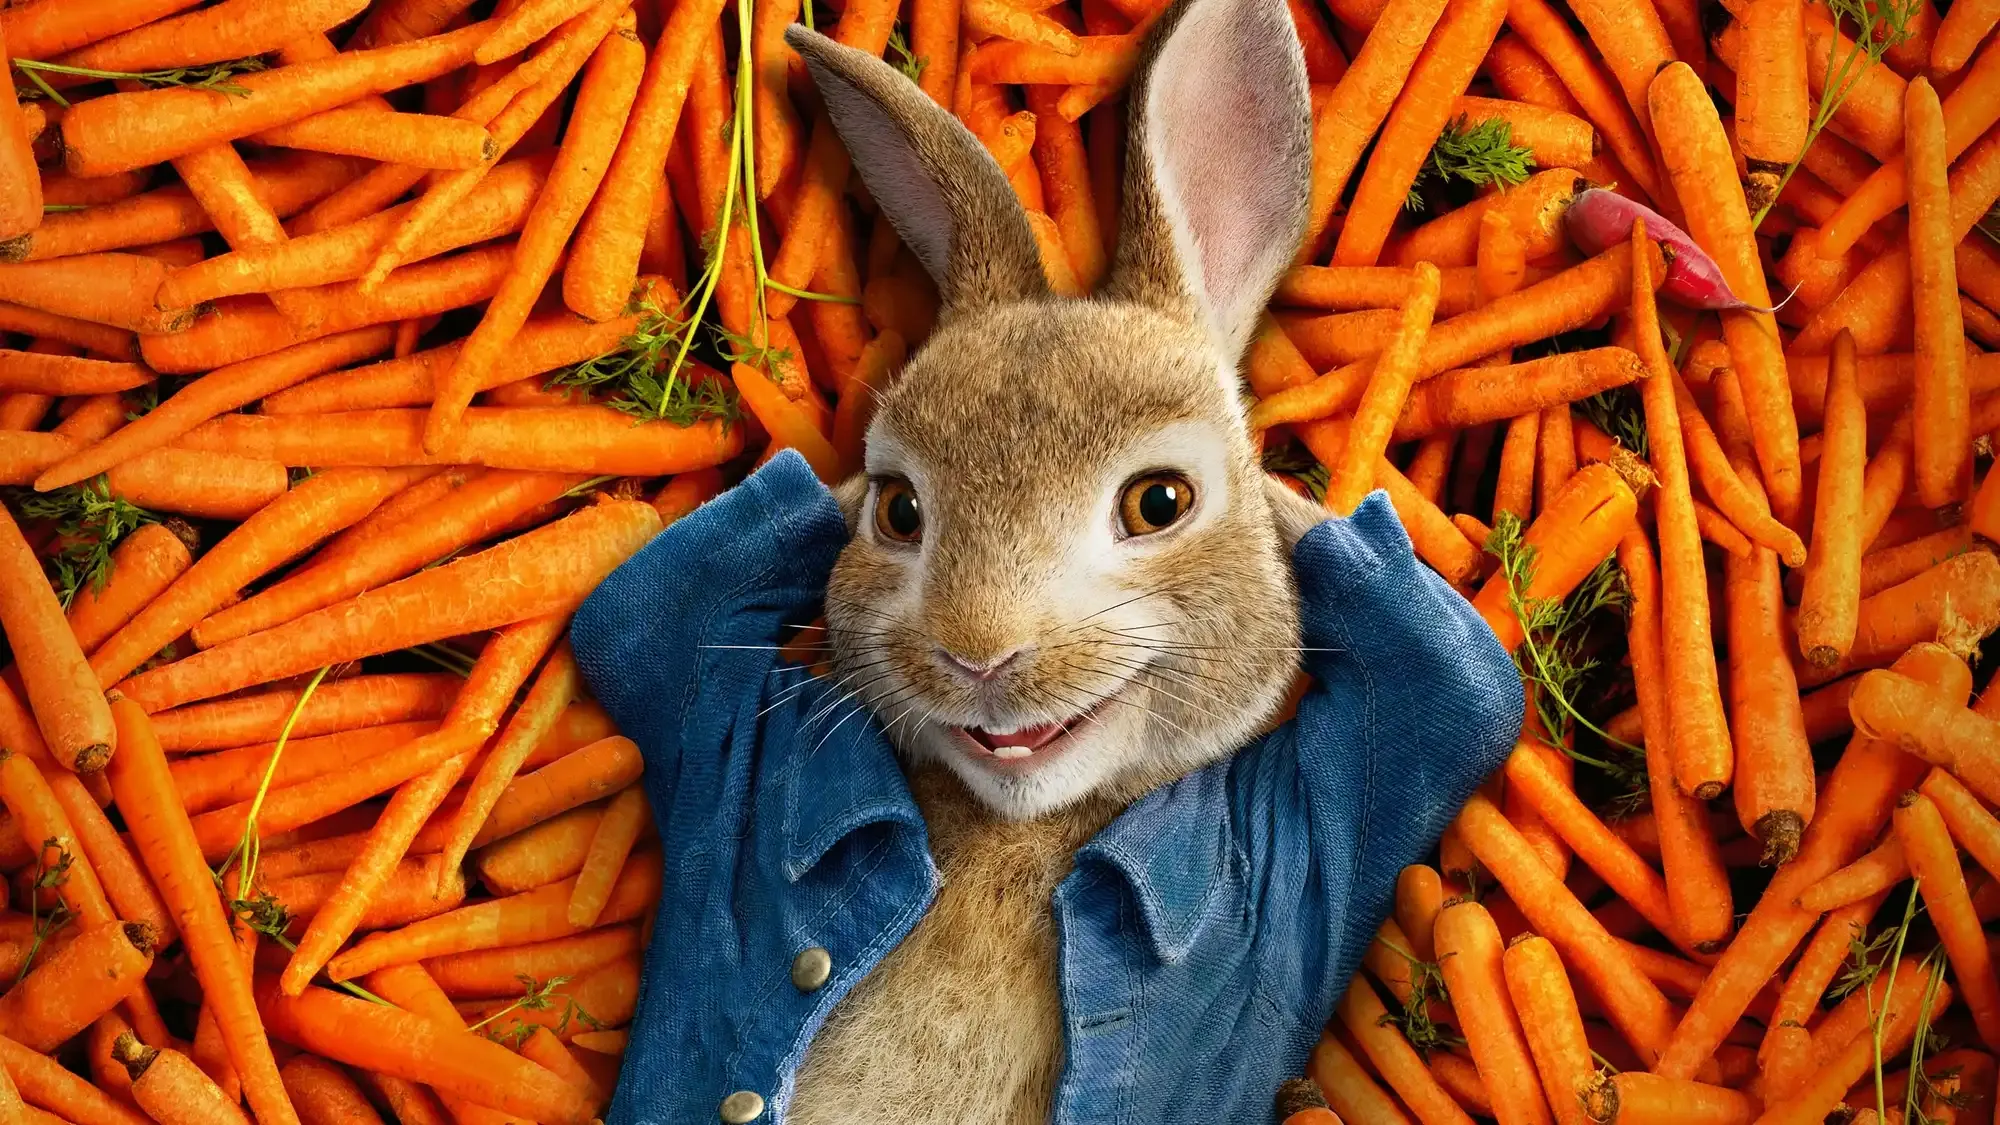 Peter Rabbit movie review